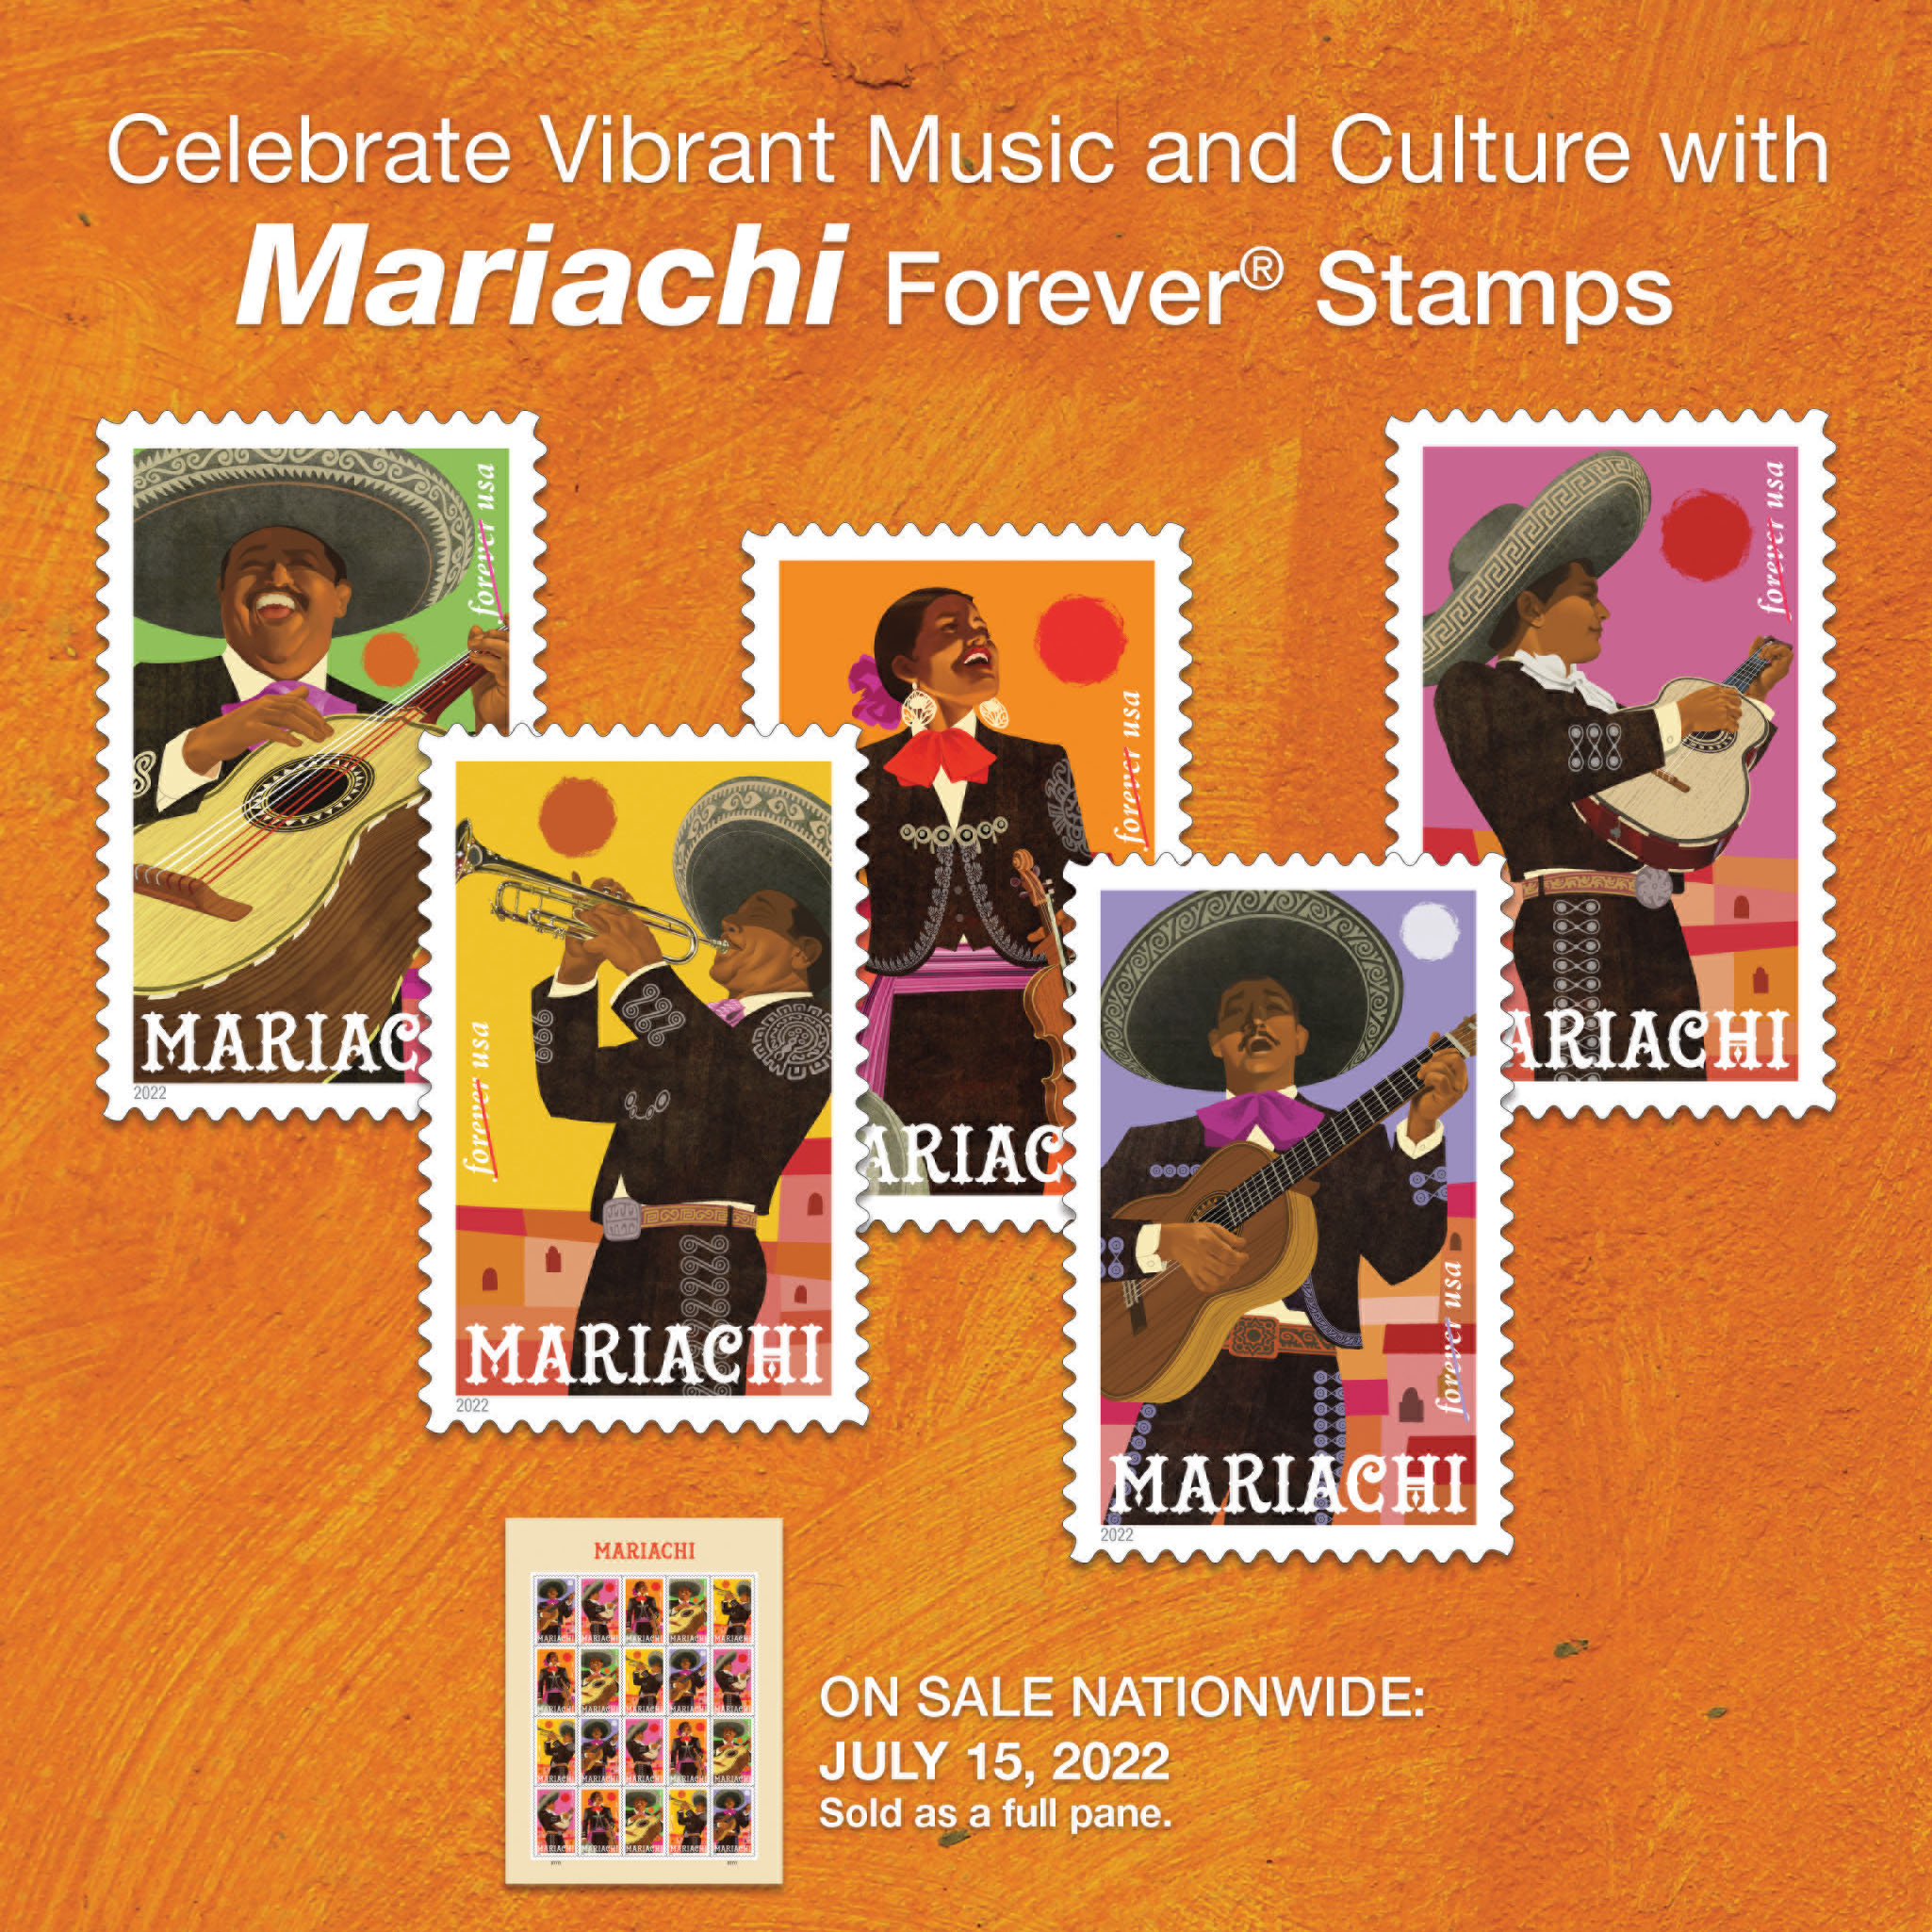 Back cover (Postal Bulletin 22606). September 8, 2022. Celebrate Vibrant Music and Culture with Mariachi Forever Stamps. On Sale Nationwide: July 15, 2022. Sold as a full pane.